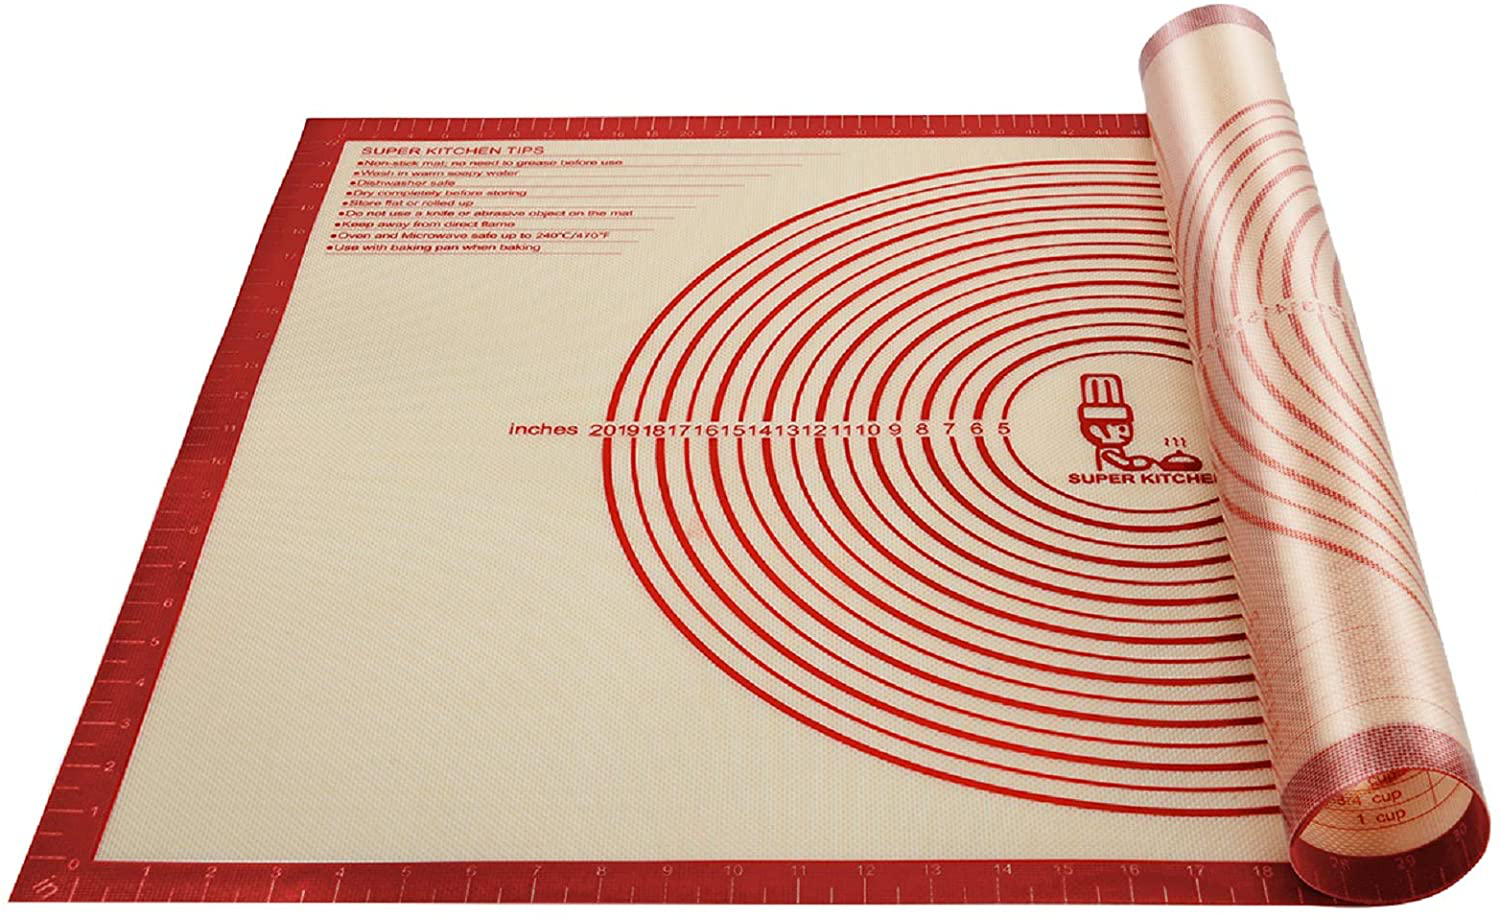 Non-Slip Silicone Pastry Mat Extra Large with Measurements 36''By 24'' for Silicone Baking Mat, Counter Mat, Dough Rolling Mat,Oven Liner,Fondant/Pie Crust Mat（Red）